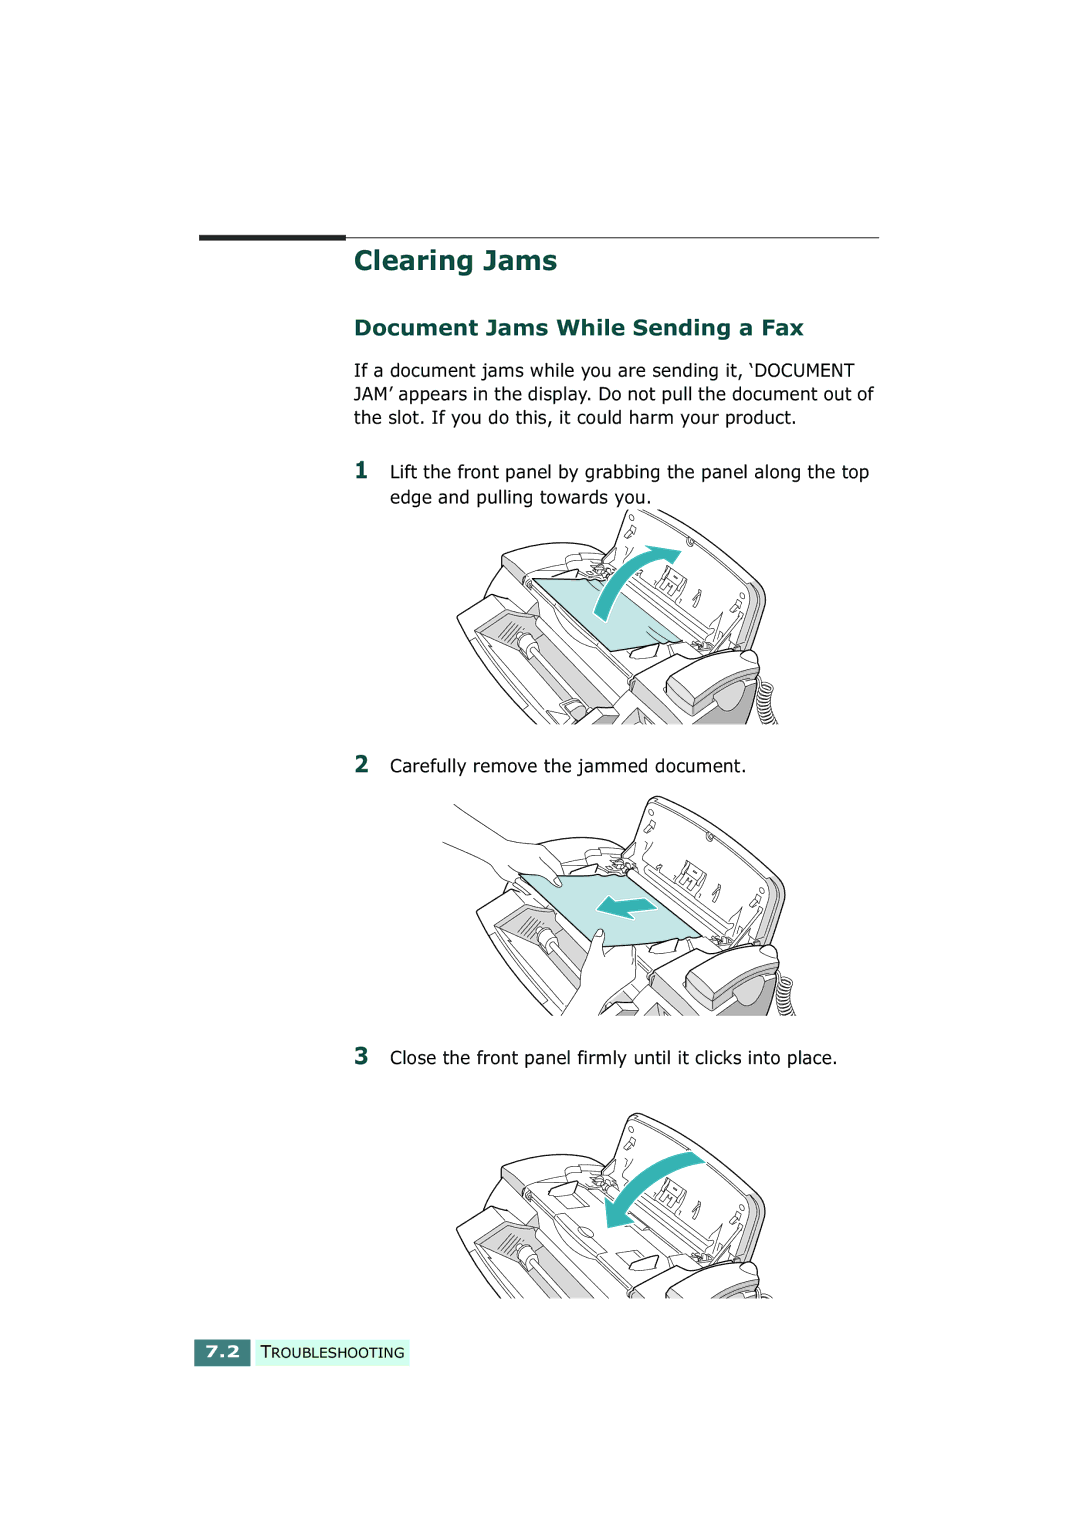 Samsung SF-430 manual Clearing Jams, Document Jams While Sending a Fax 